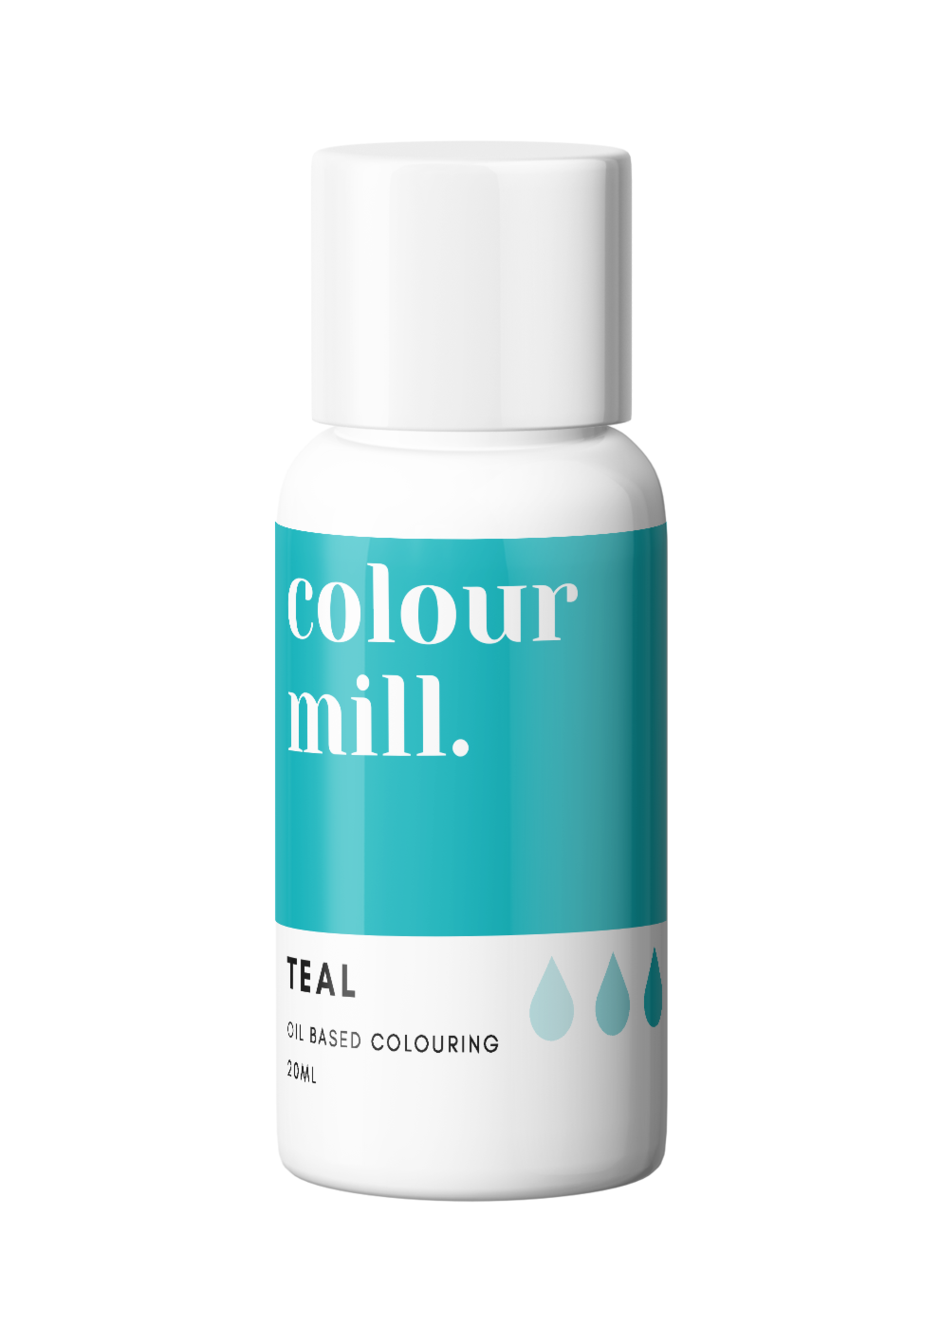 Teal, 20ml, Colour Mill Oil Based Colouring